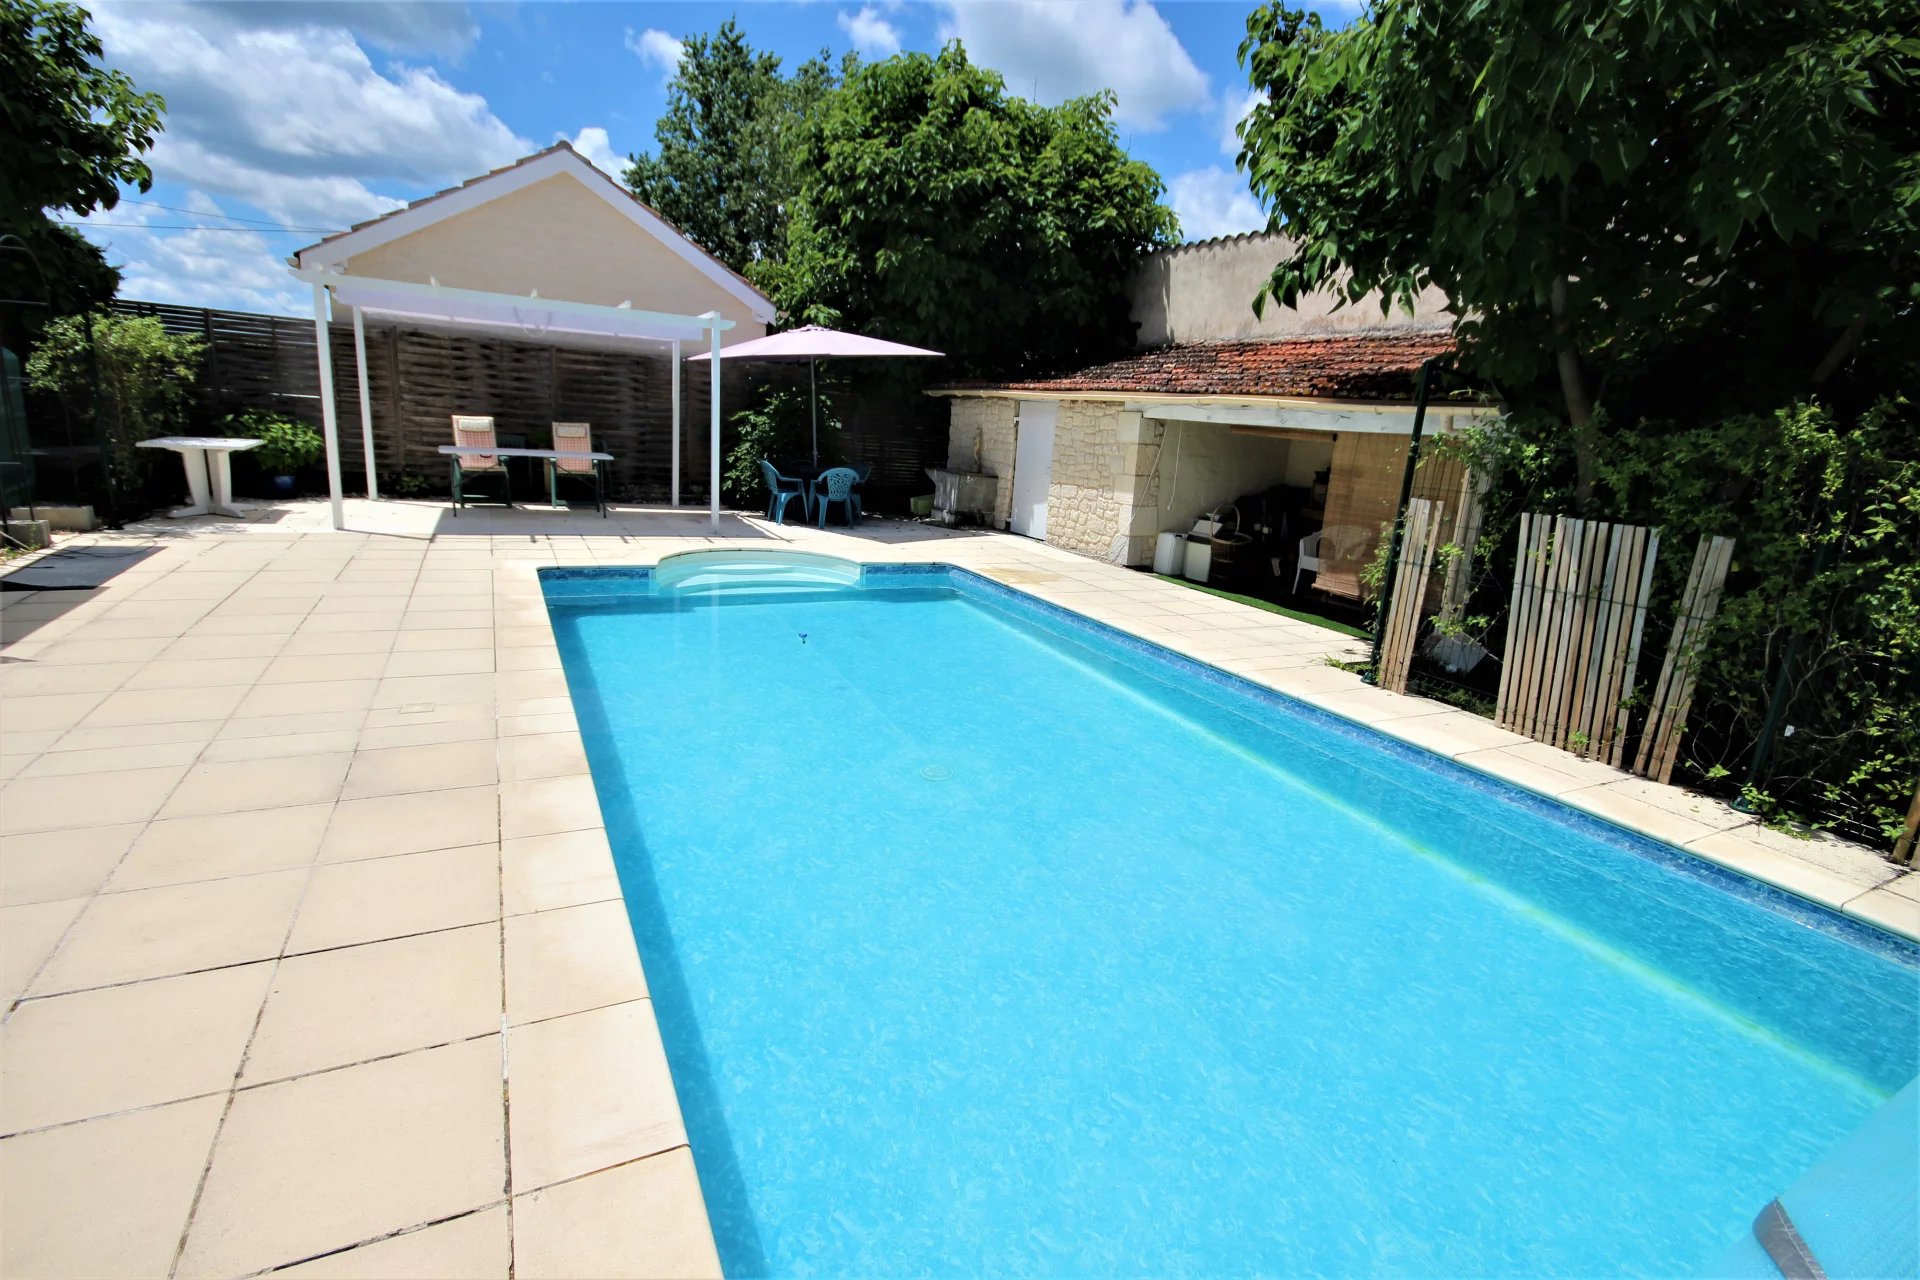 Neat 3/4 Bed house with pool in a leafy suburb of Eymet